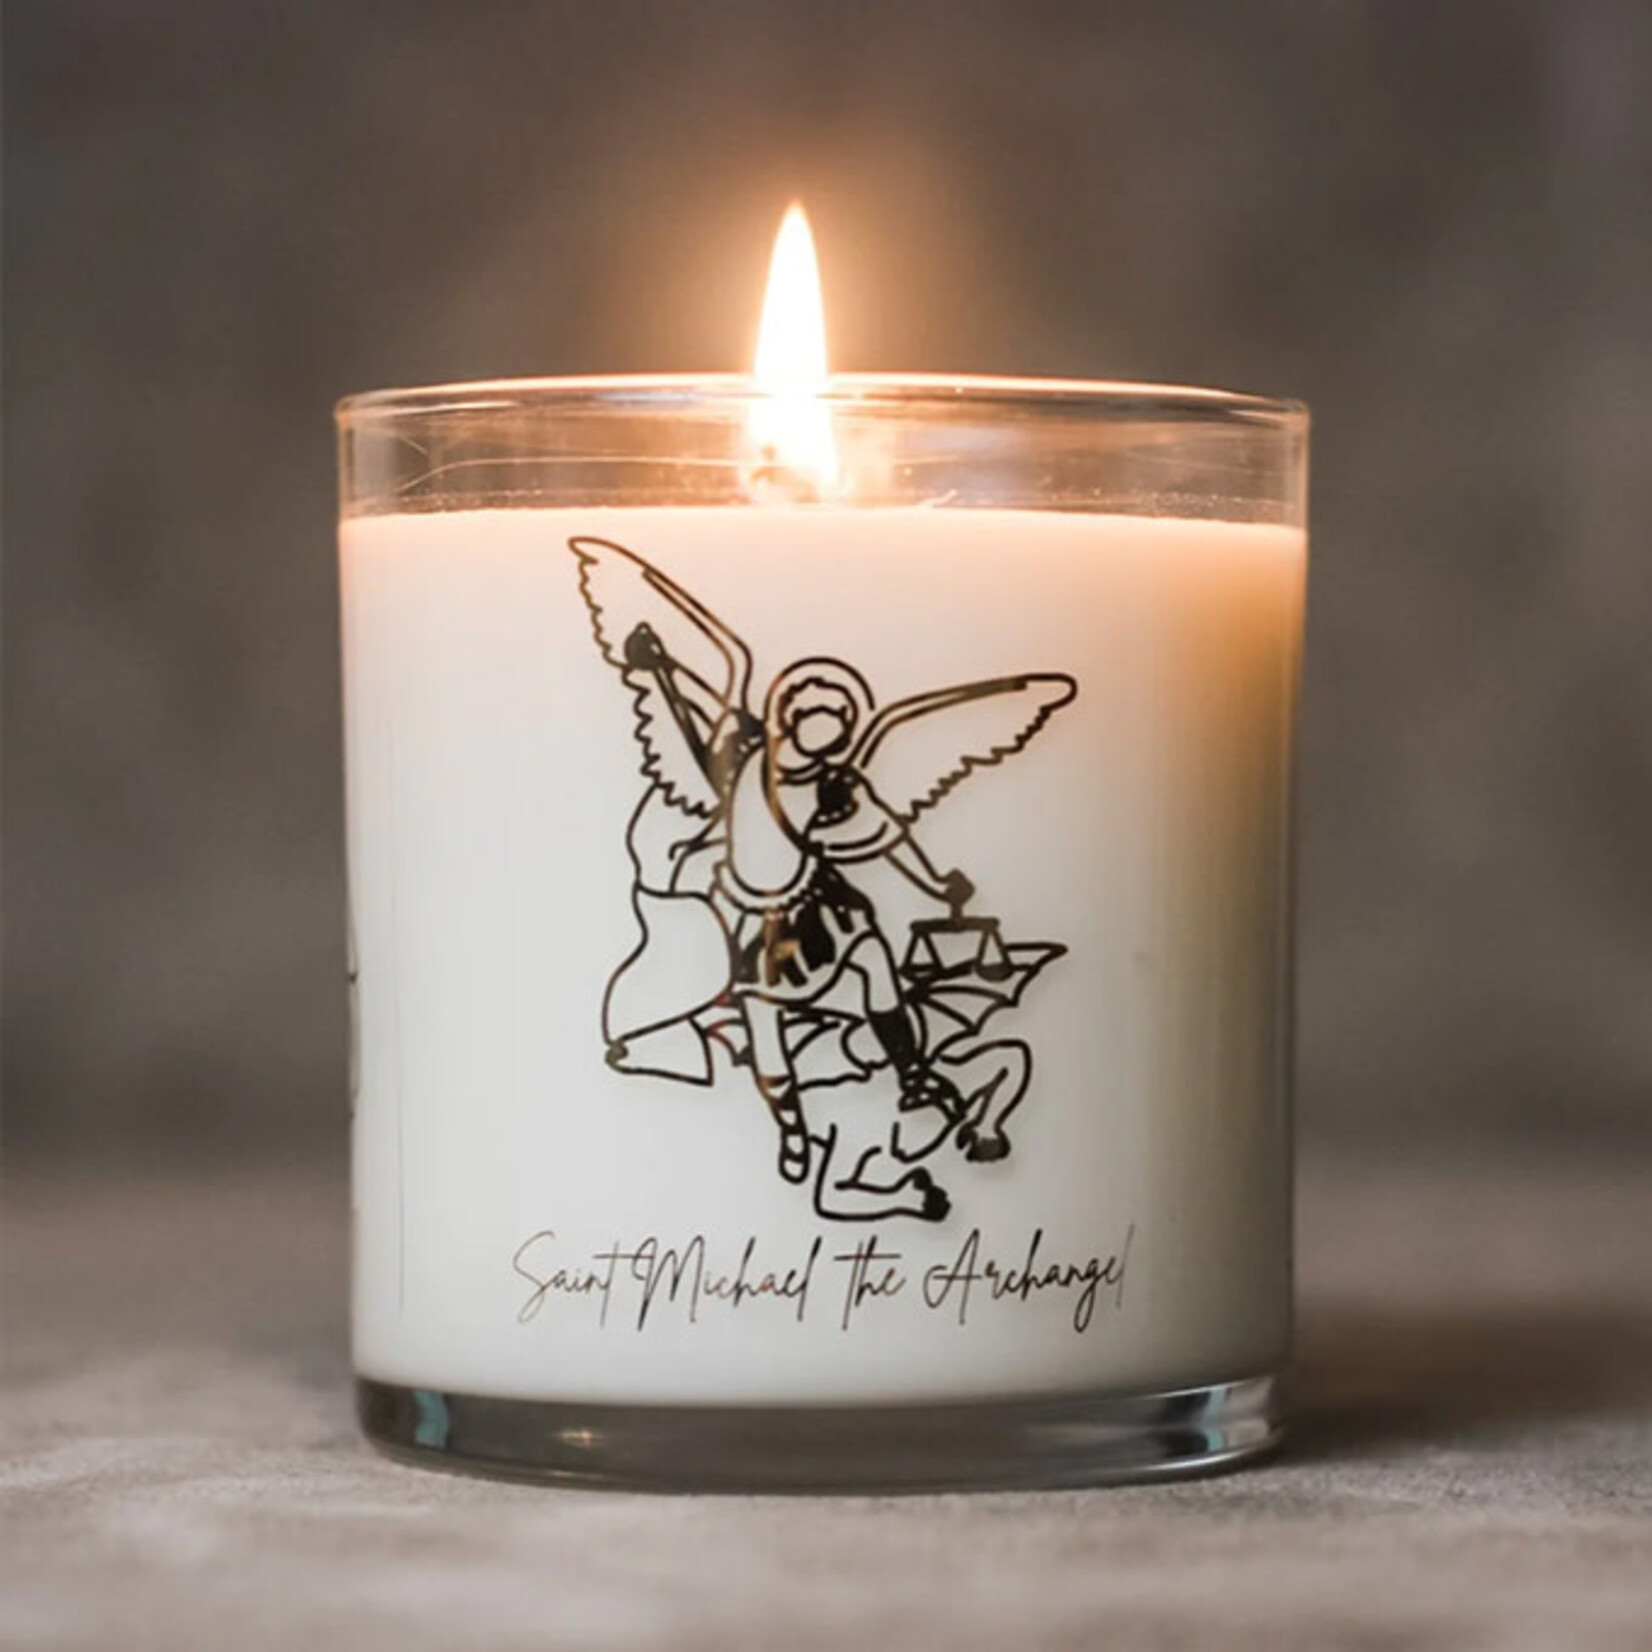 St. Michael Hand Poured Soy Candle - Cedar Musk and Lavender